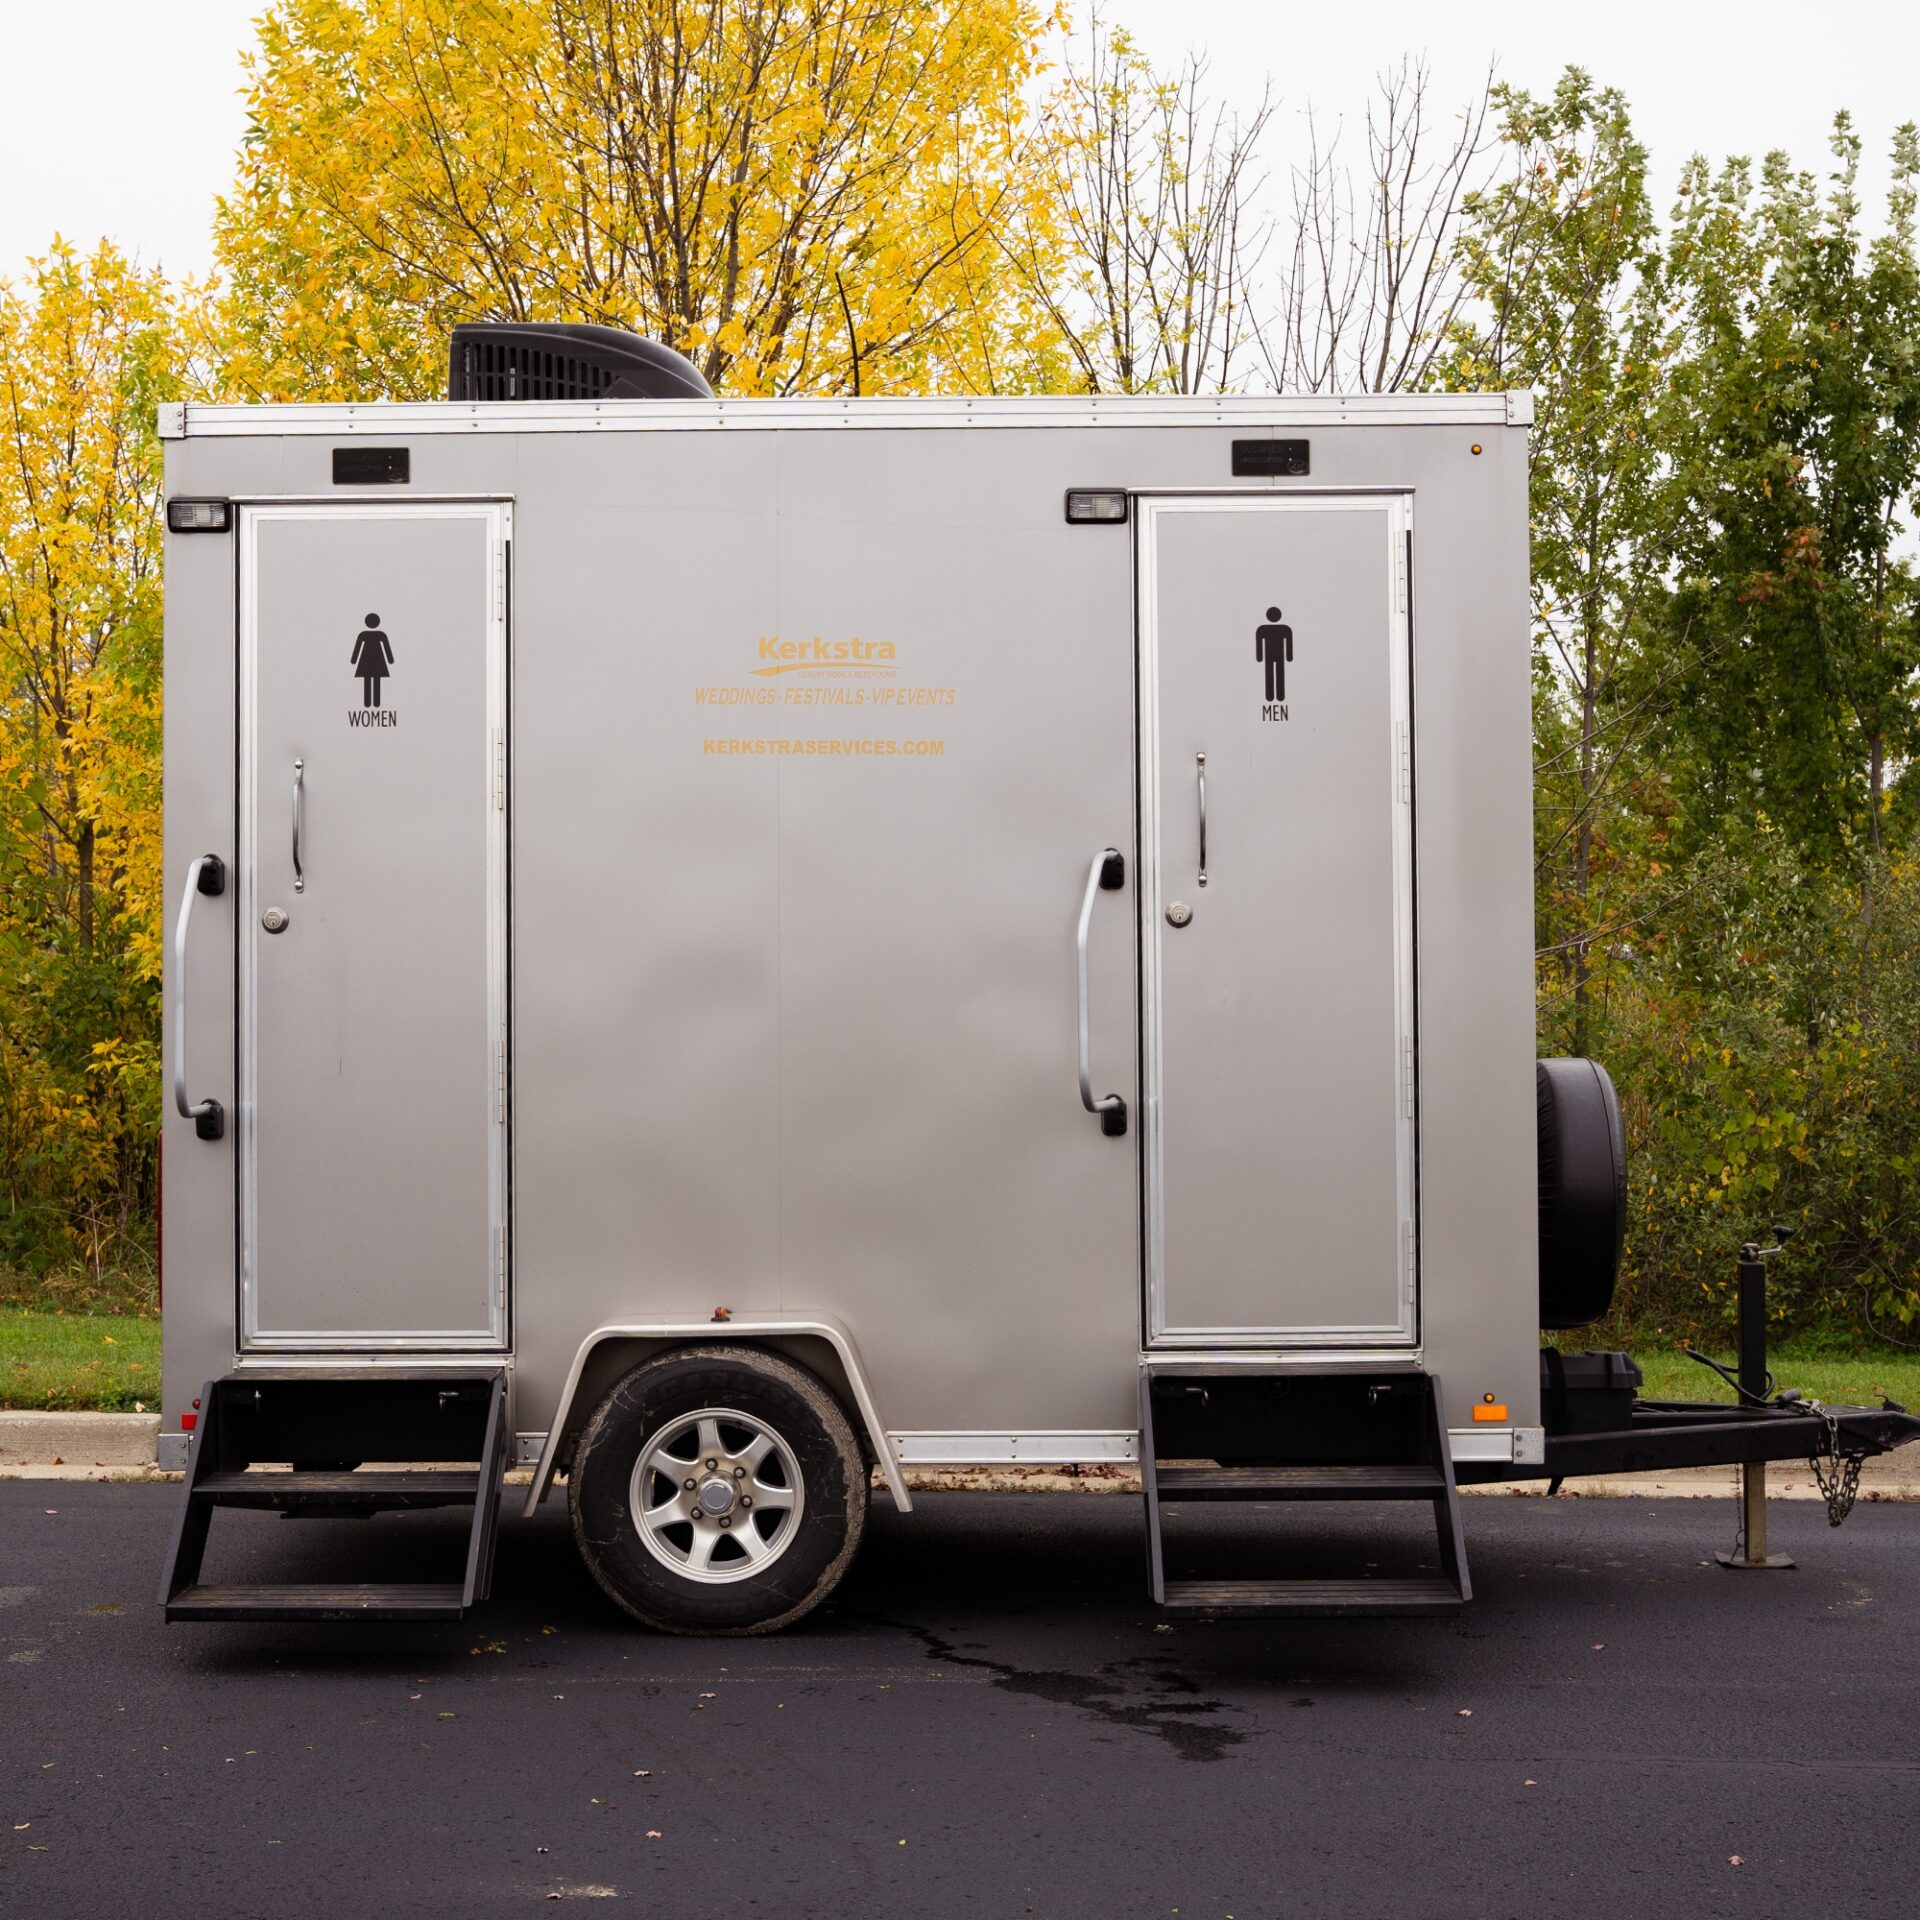 Luxury Restroom Trailers - The Rustic - FRONT